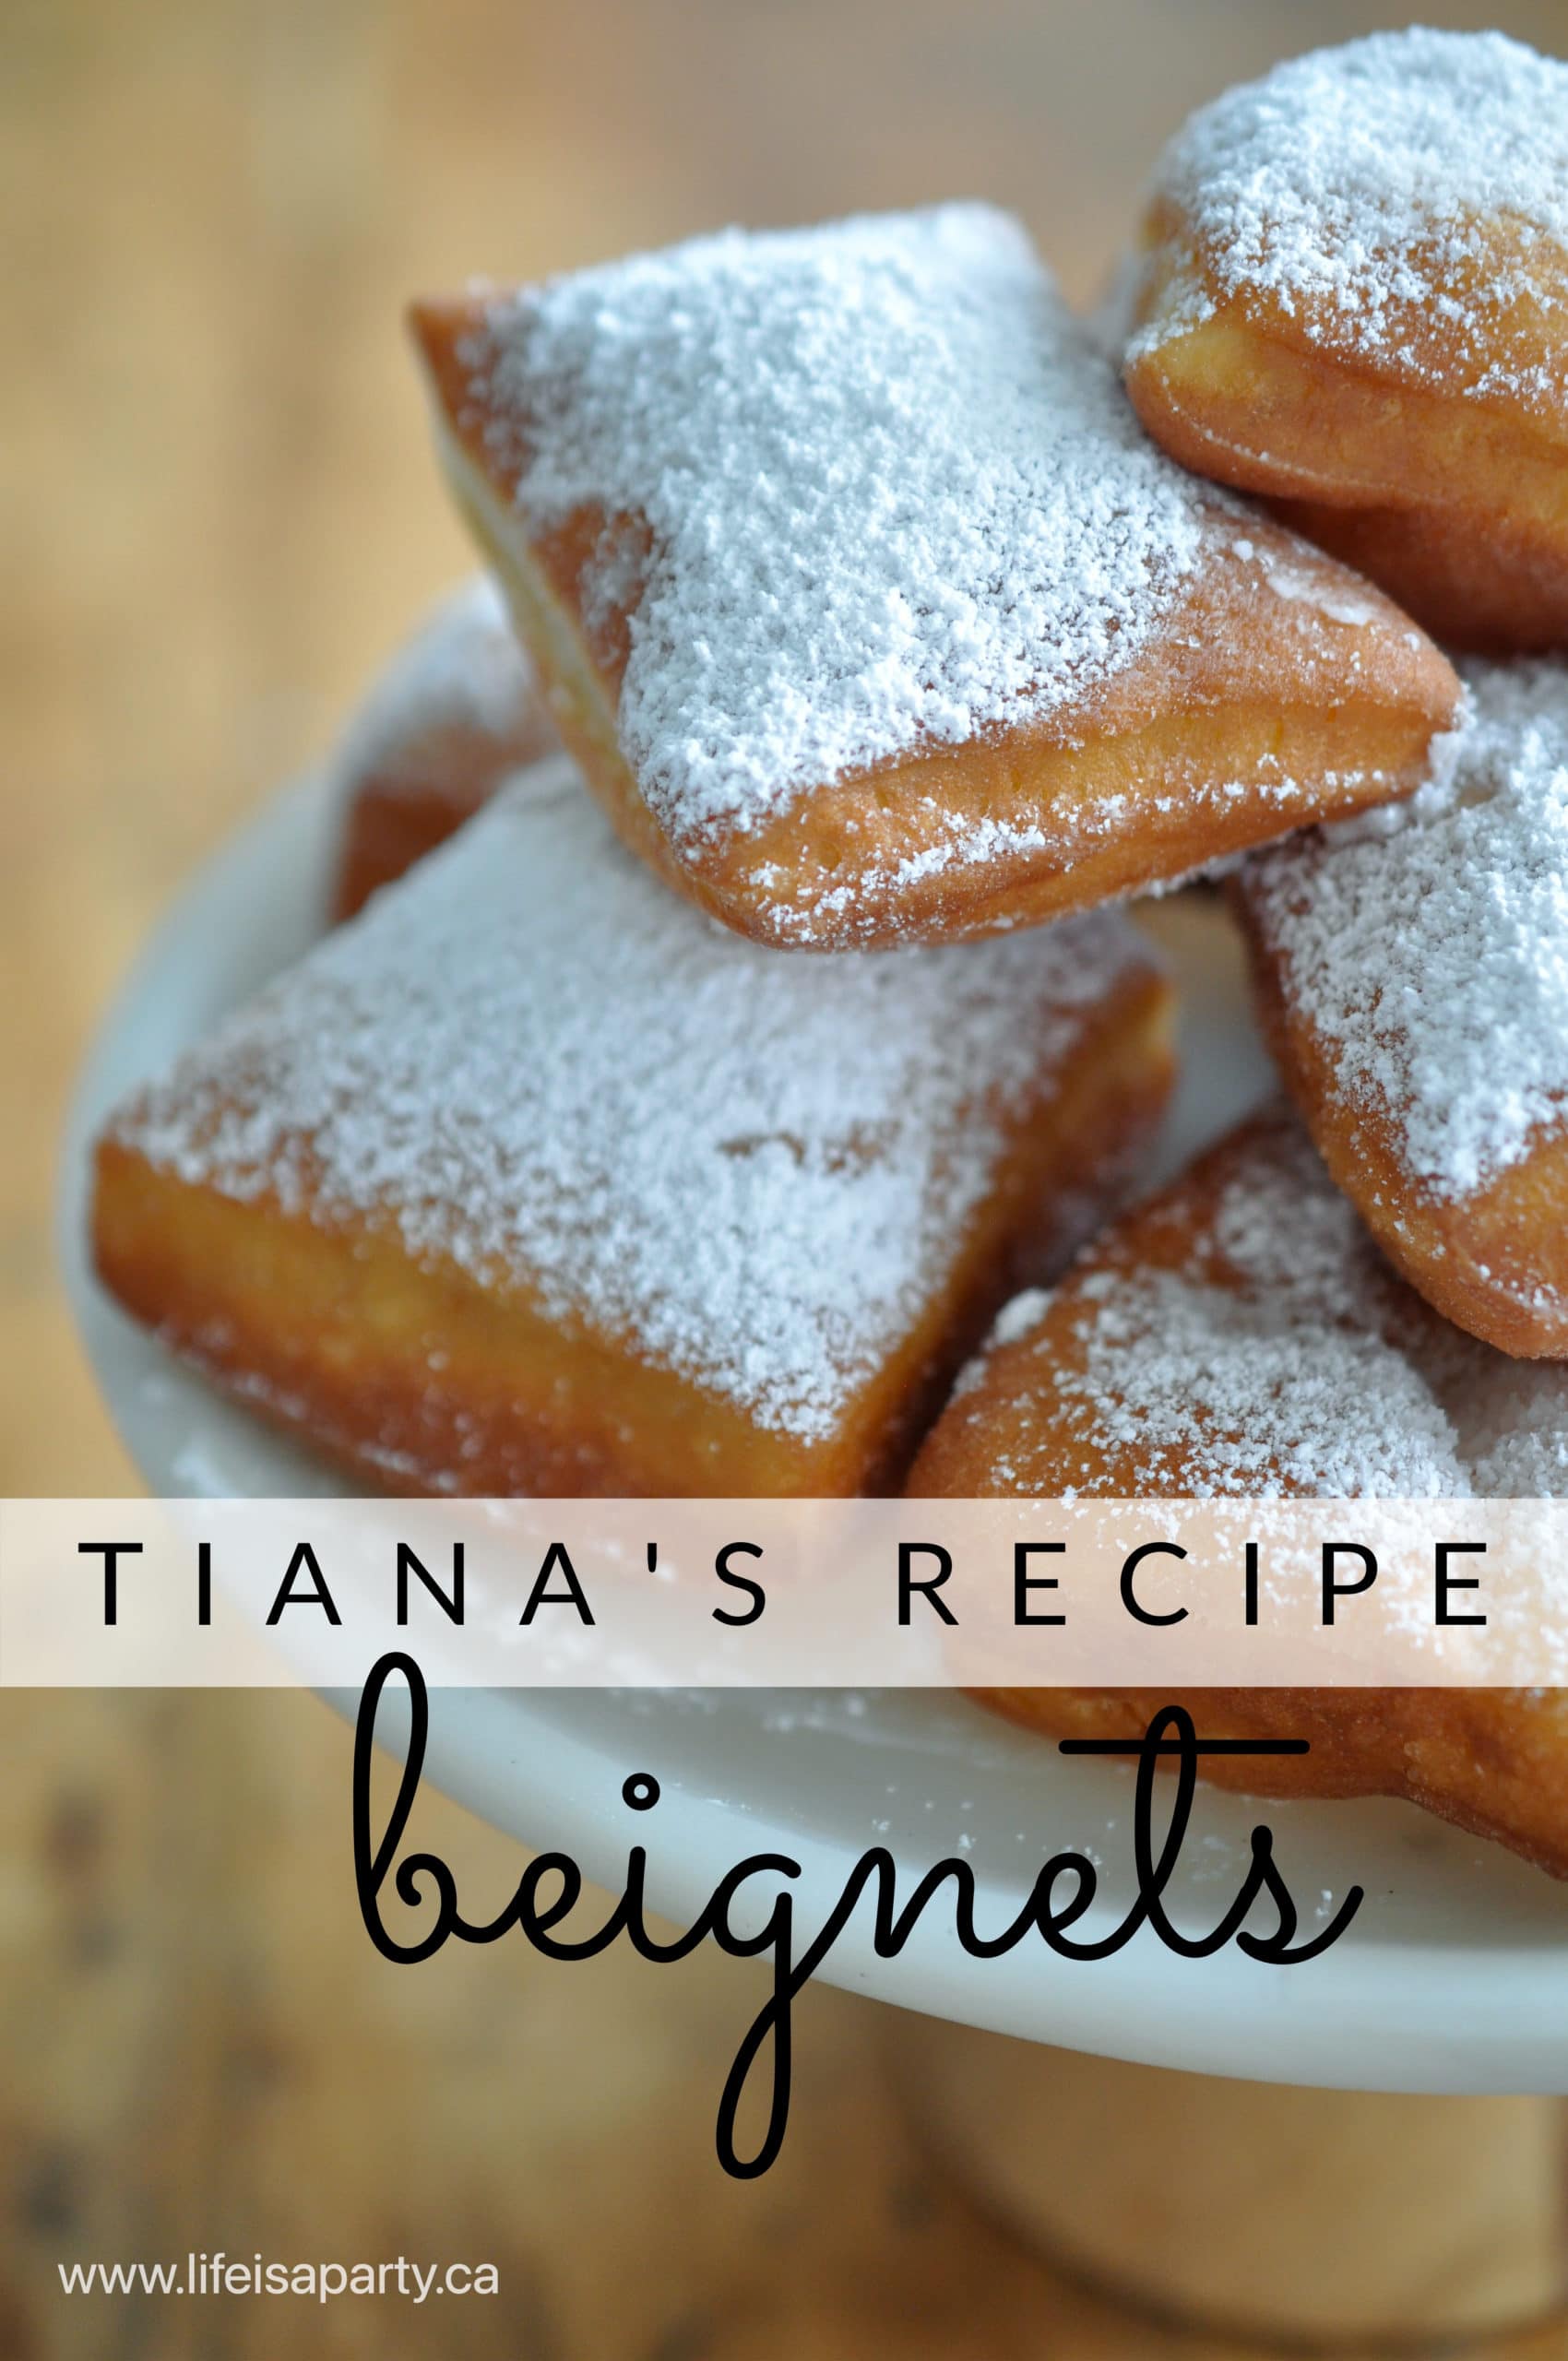 Tiana’s Beignet Recipe from The Princess and The Frog